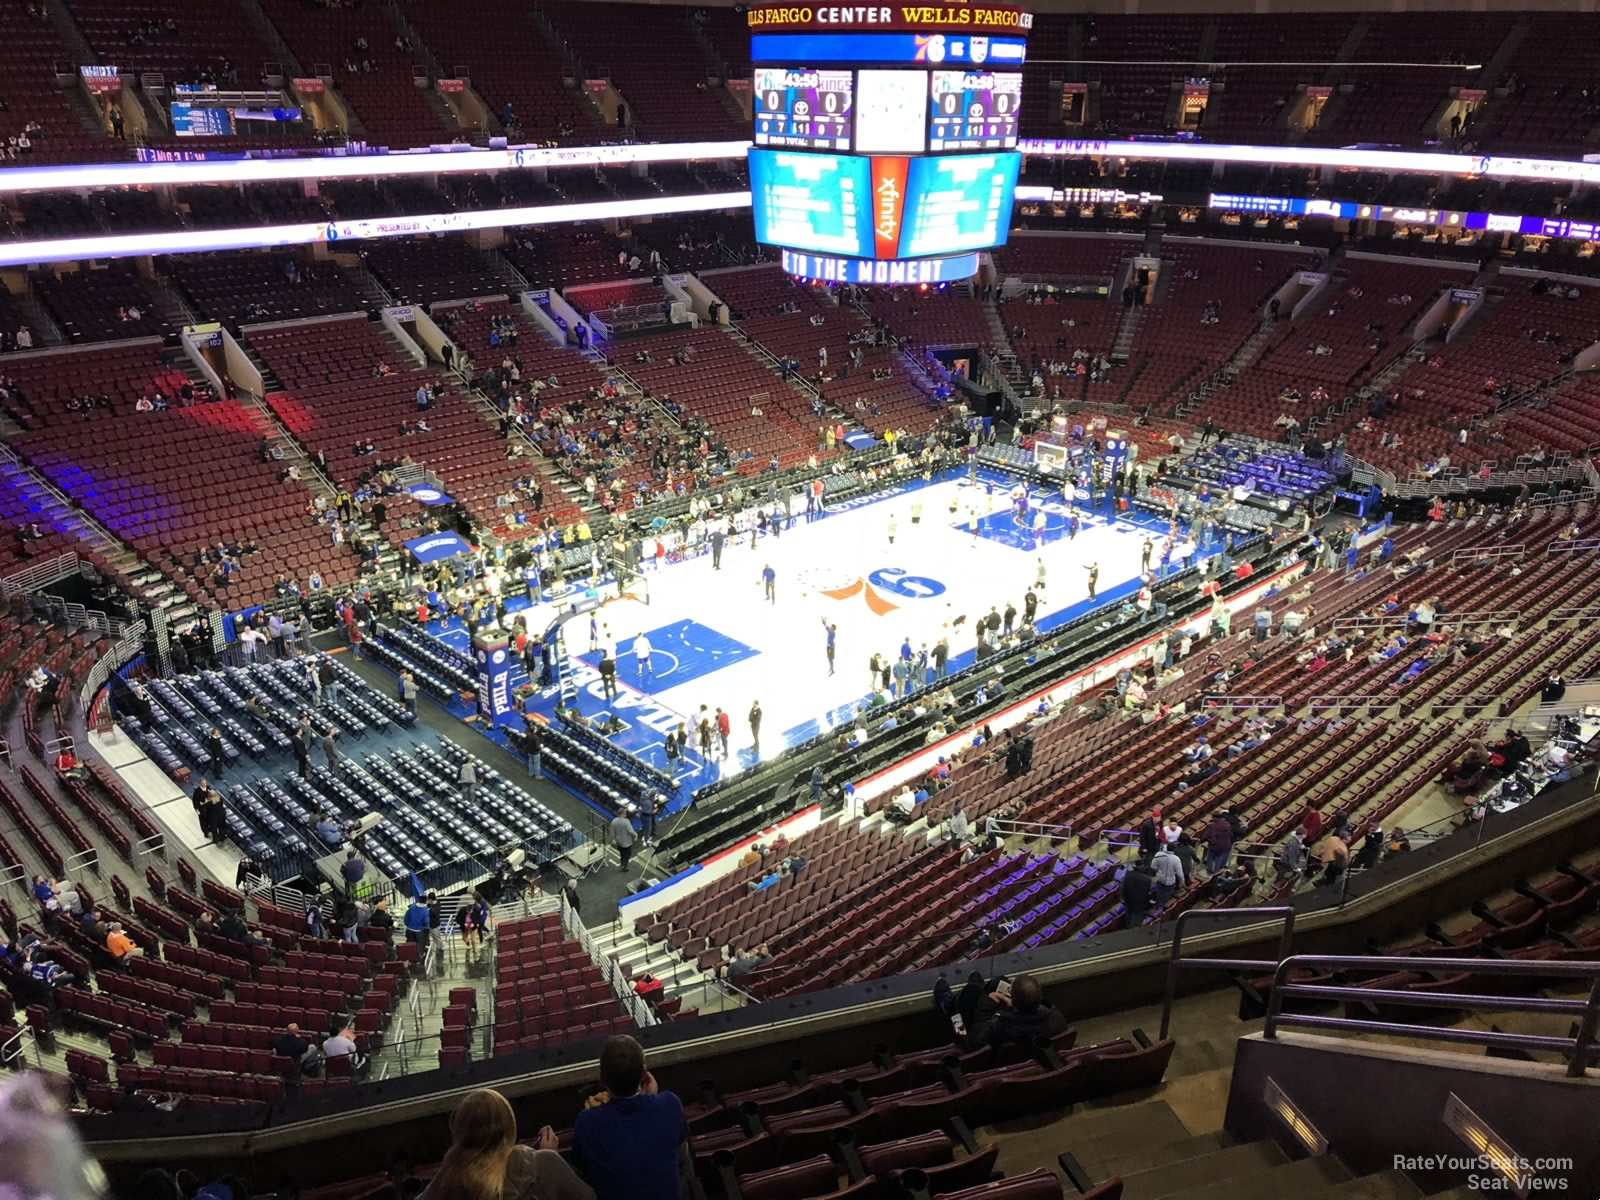 section 210, row 7 seat view  for basketball - wells fargo center